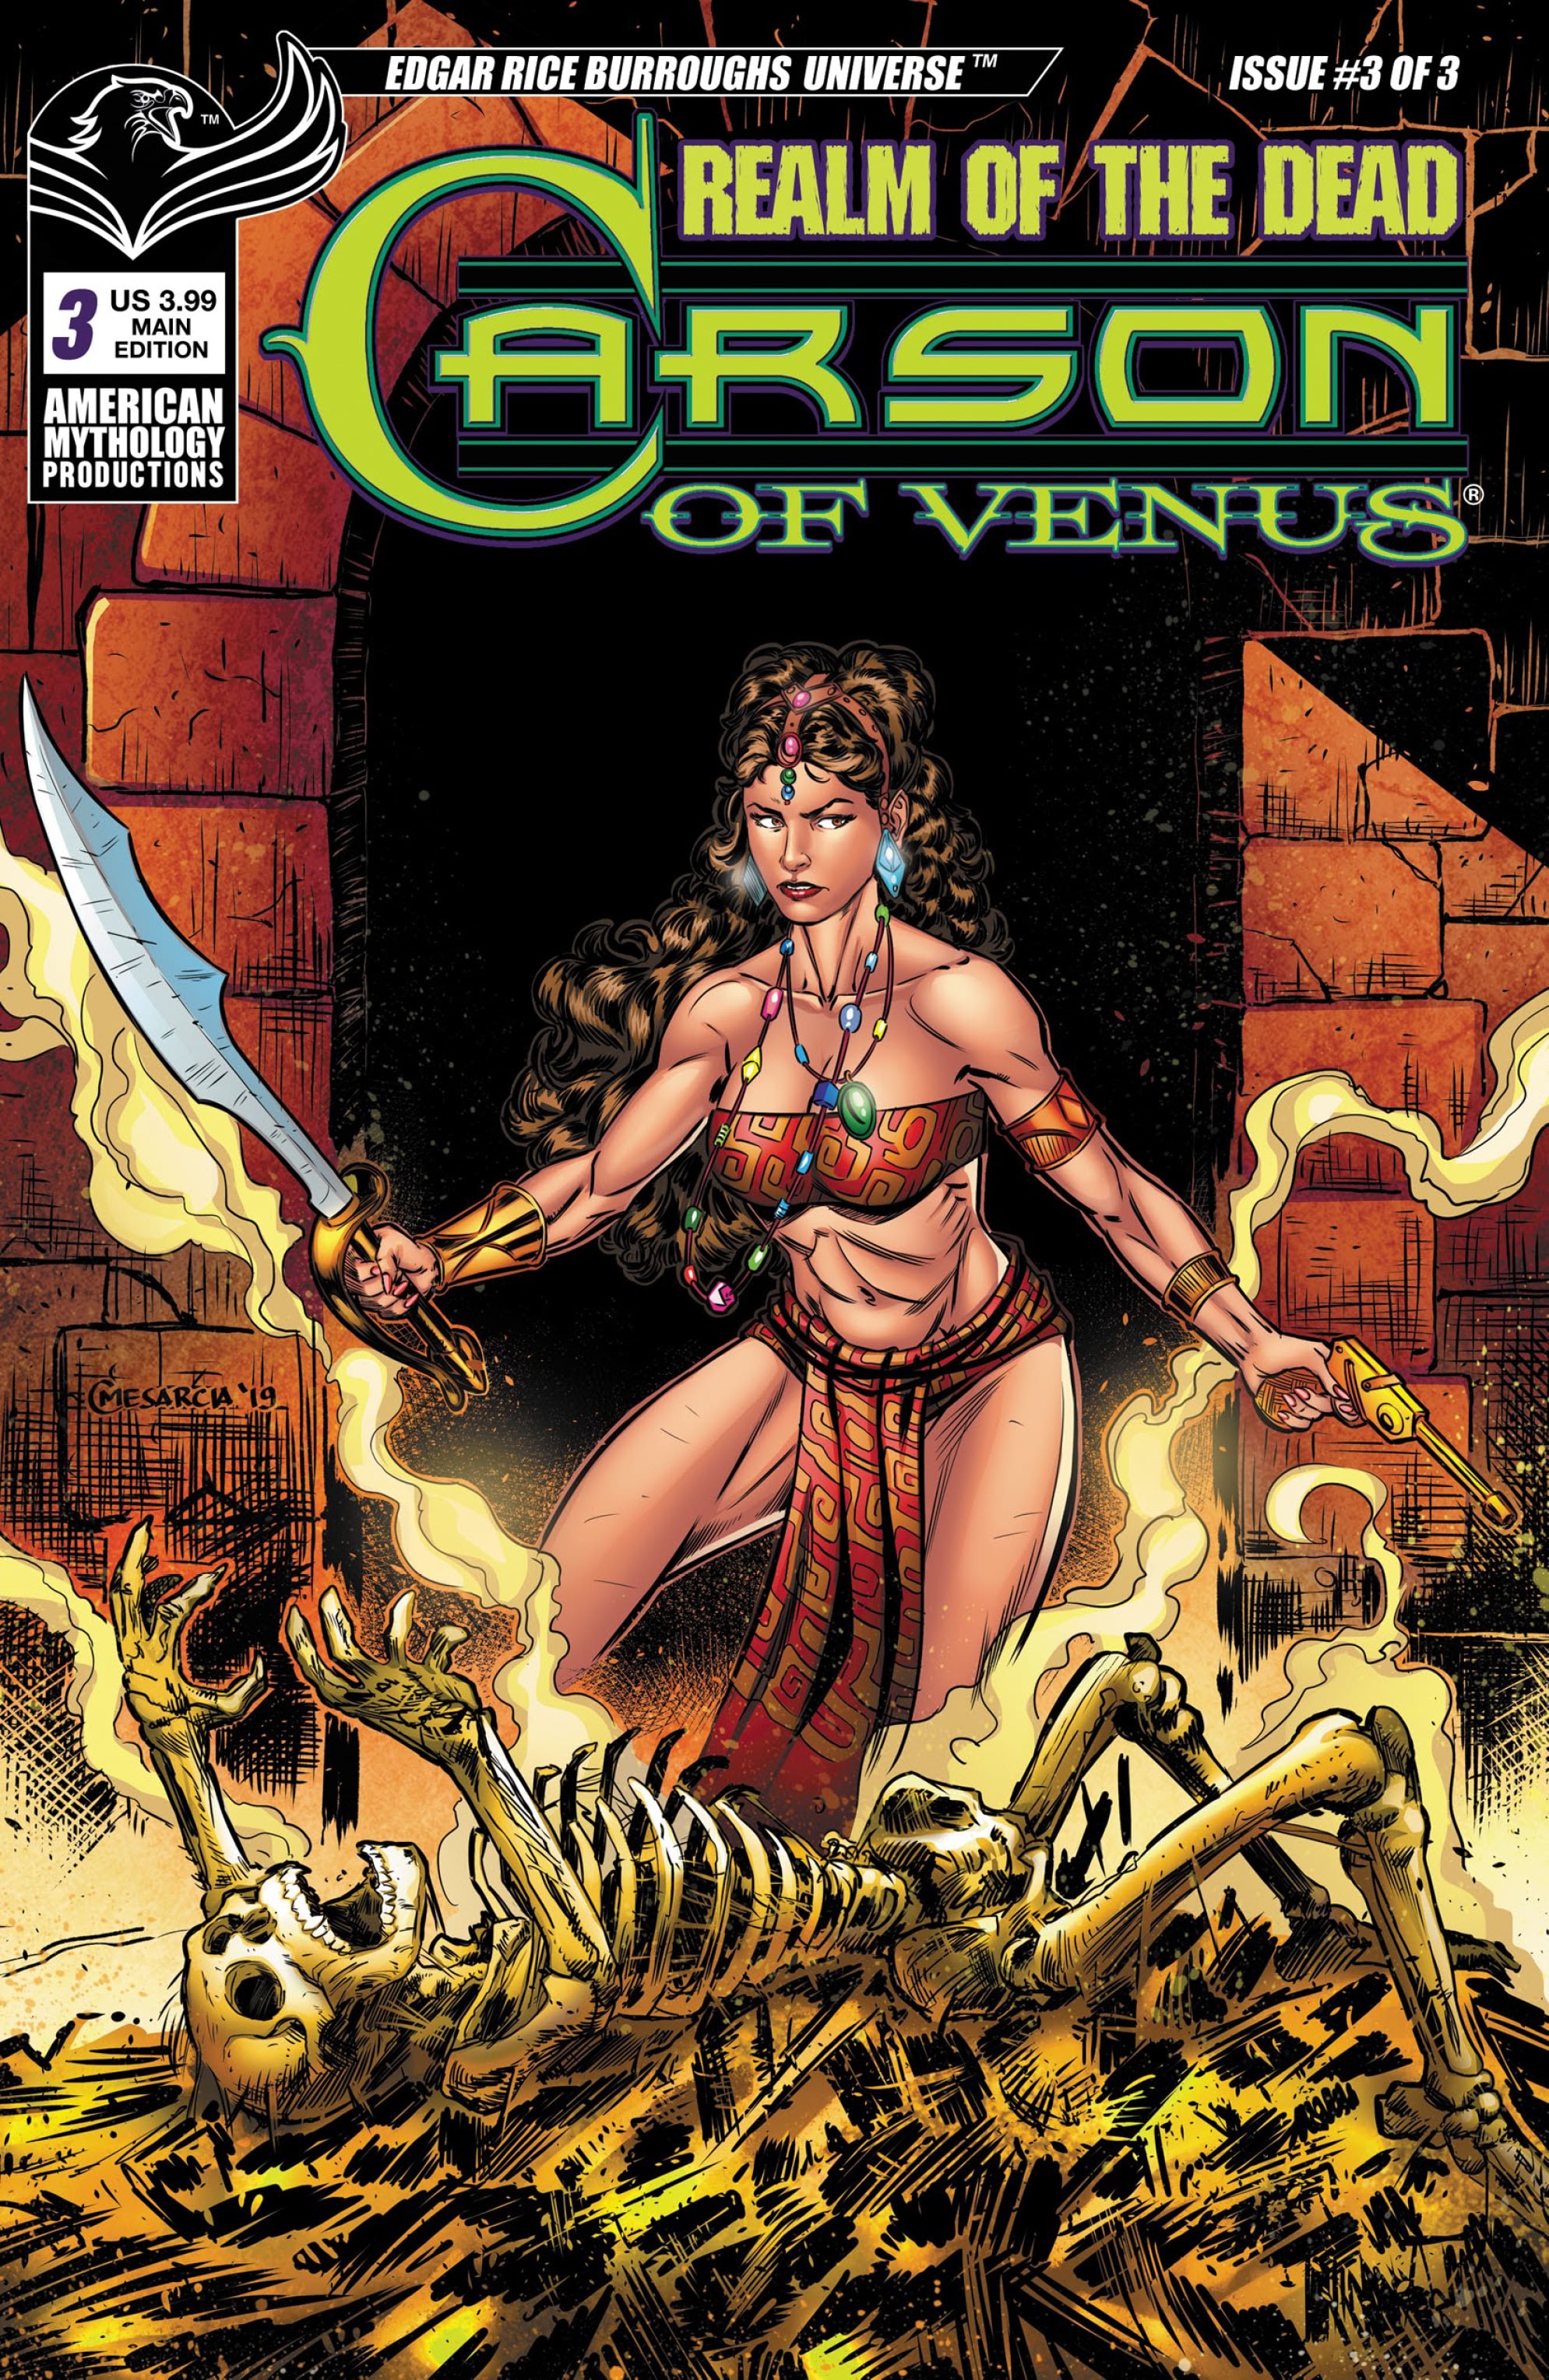 Read online ERB Carson of Venus: Realm of the Dead comic -  Issue #3 - 1